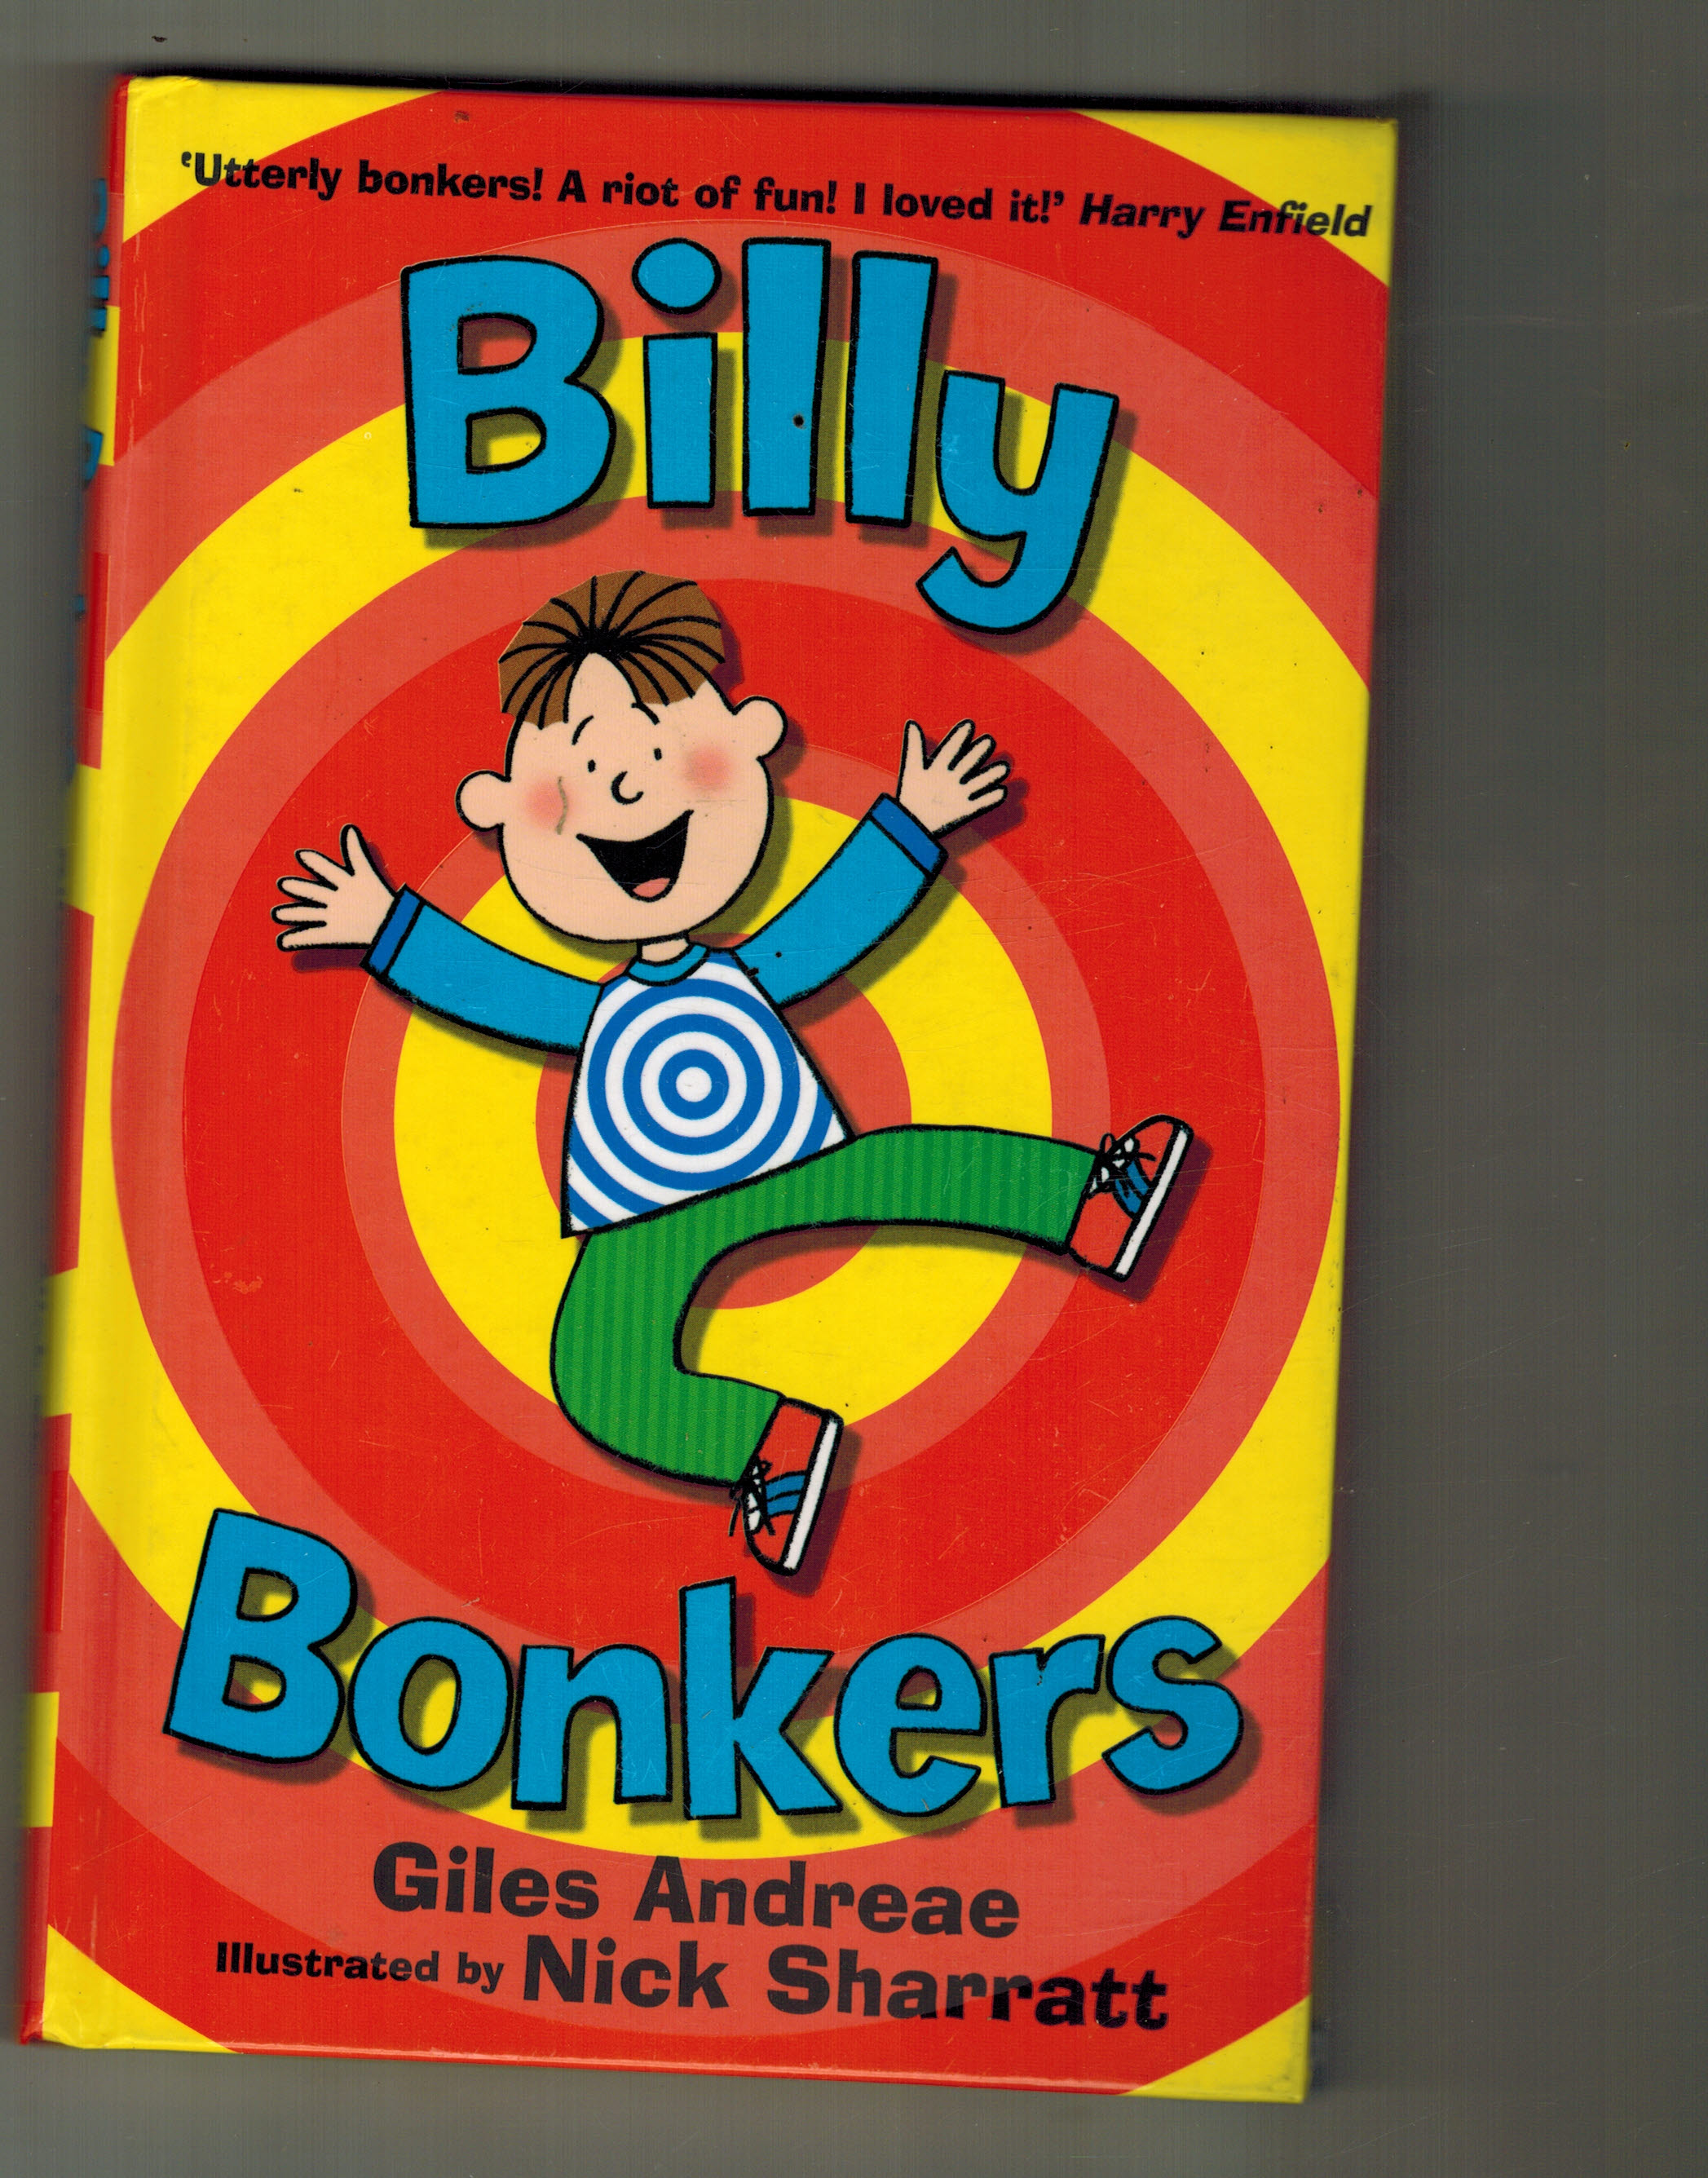 Billy Bomkers Giles Andreae , illustrated by Nick Sharratt